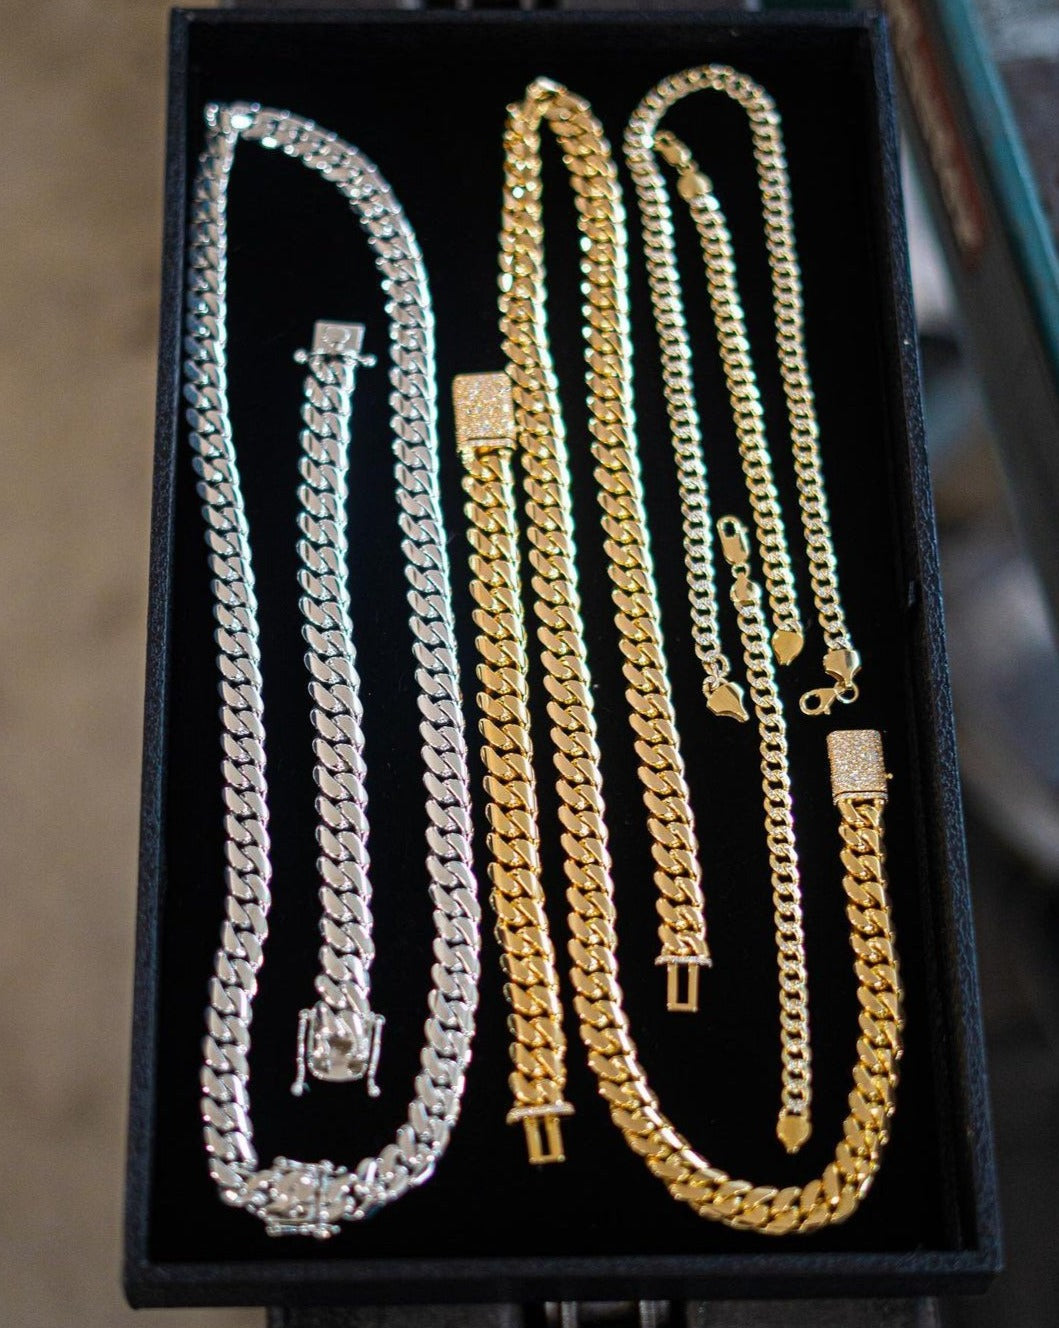 RARE PRINCE by CARAT SUTRA | Solid 10mm Miami Cuban Link Chain with Iced Lock | 22kt Gold Micron Plated on 925 Sterling Silver Chain with AAA+ Quality Swarovski Diamonds | Men's Jewelry | With Certificate of Authenticity and 925 Hallmark - caratsutra